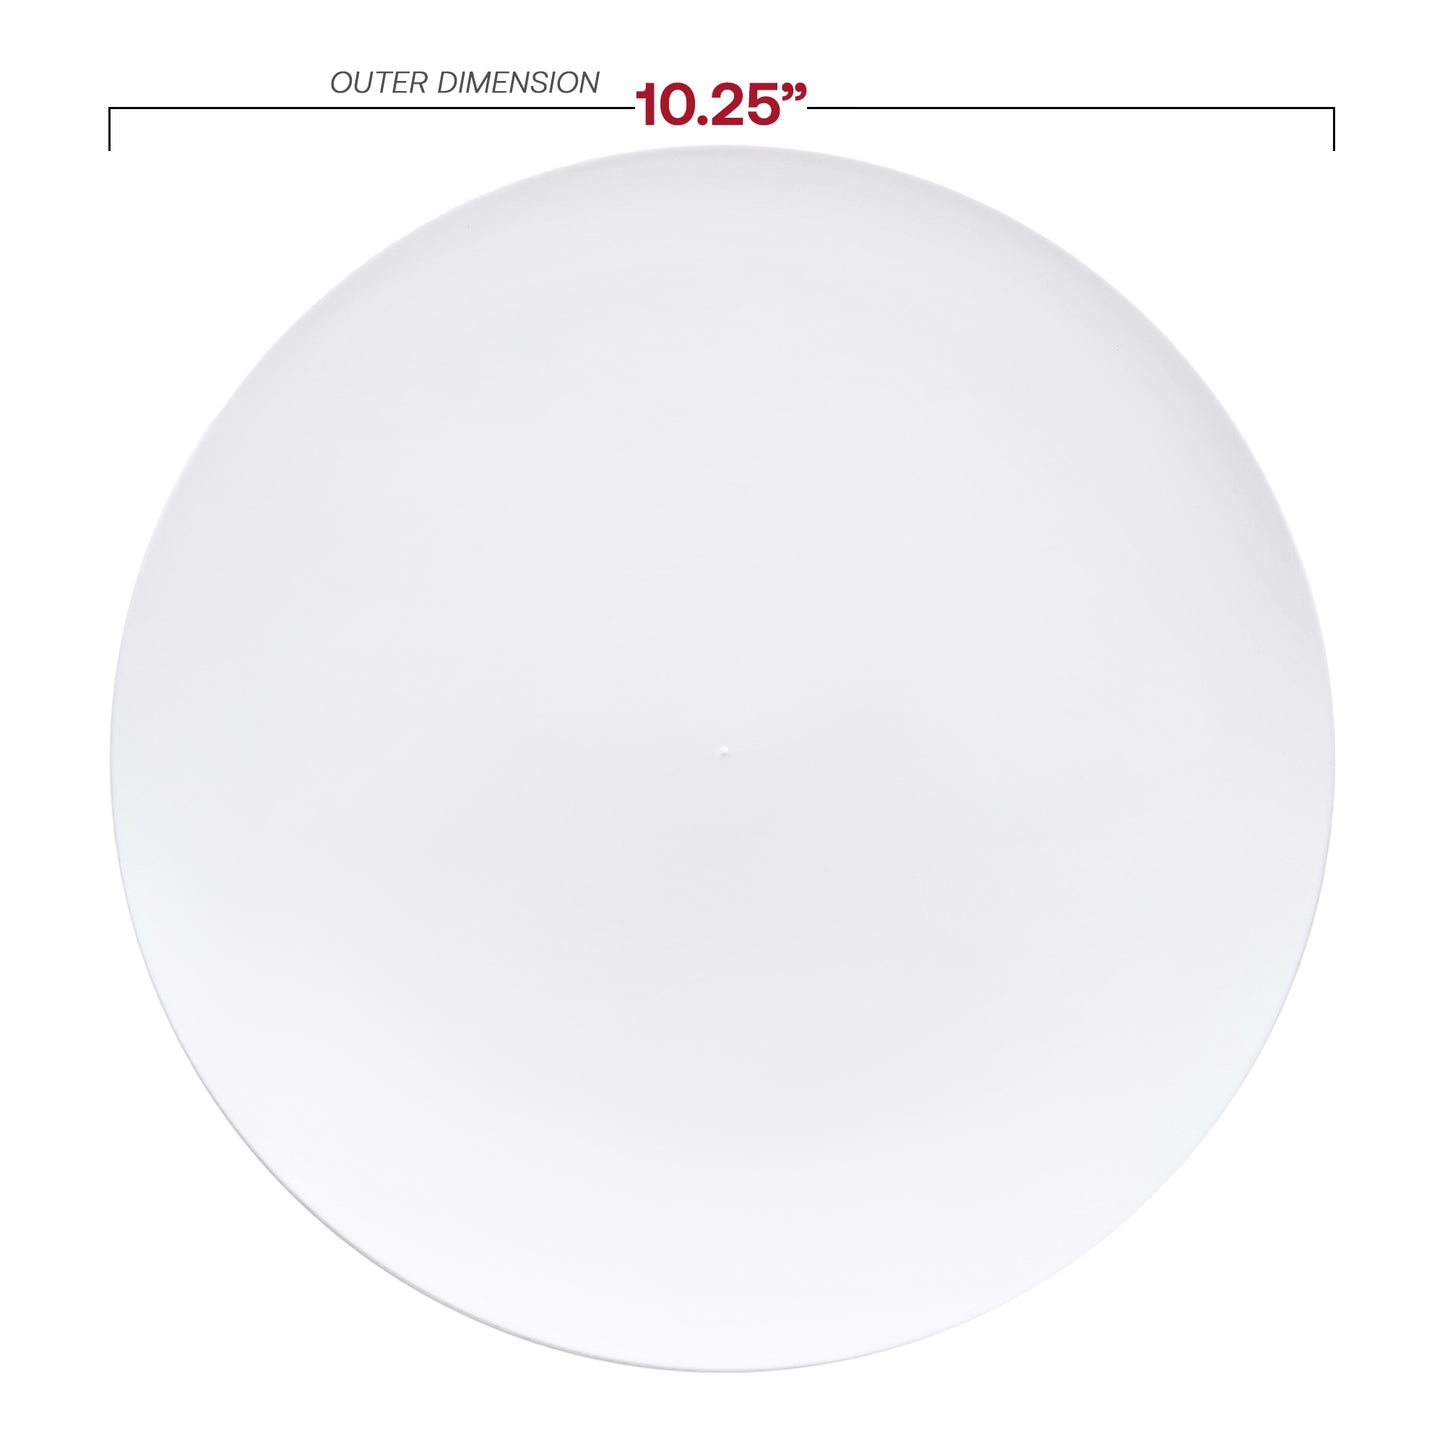 Solid White Organic Round Disposable Plastic Dinner Plates (10.25") Dimension | The Kaya Collection